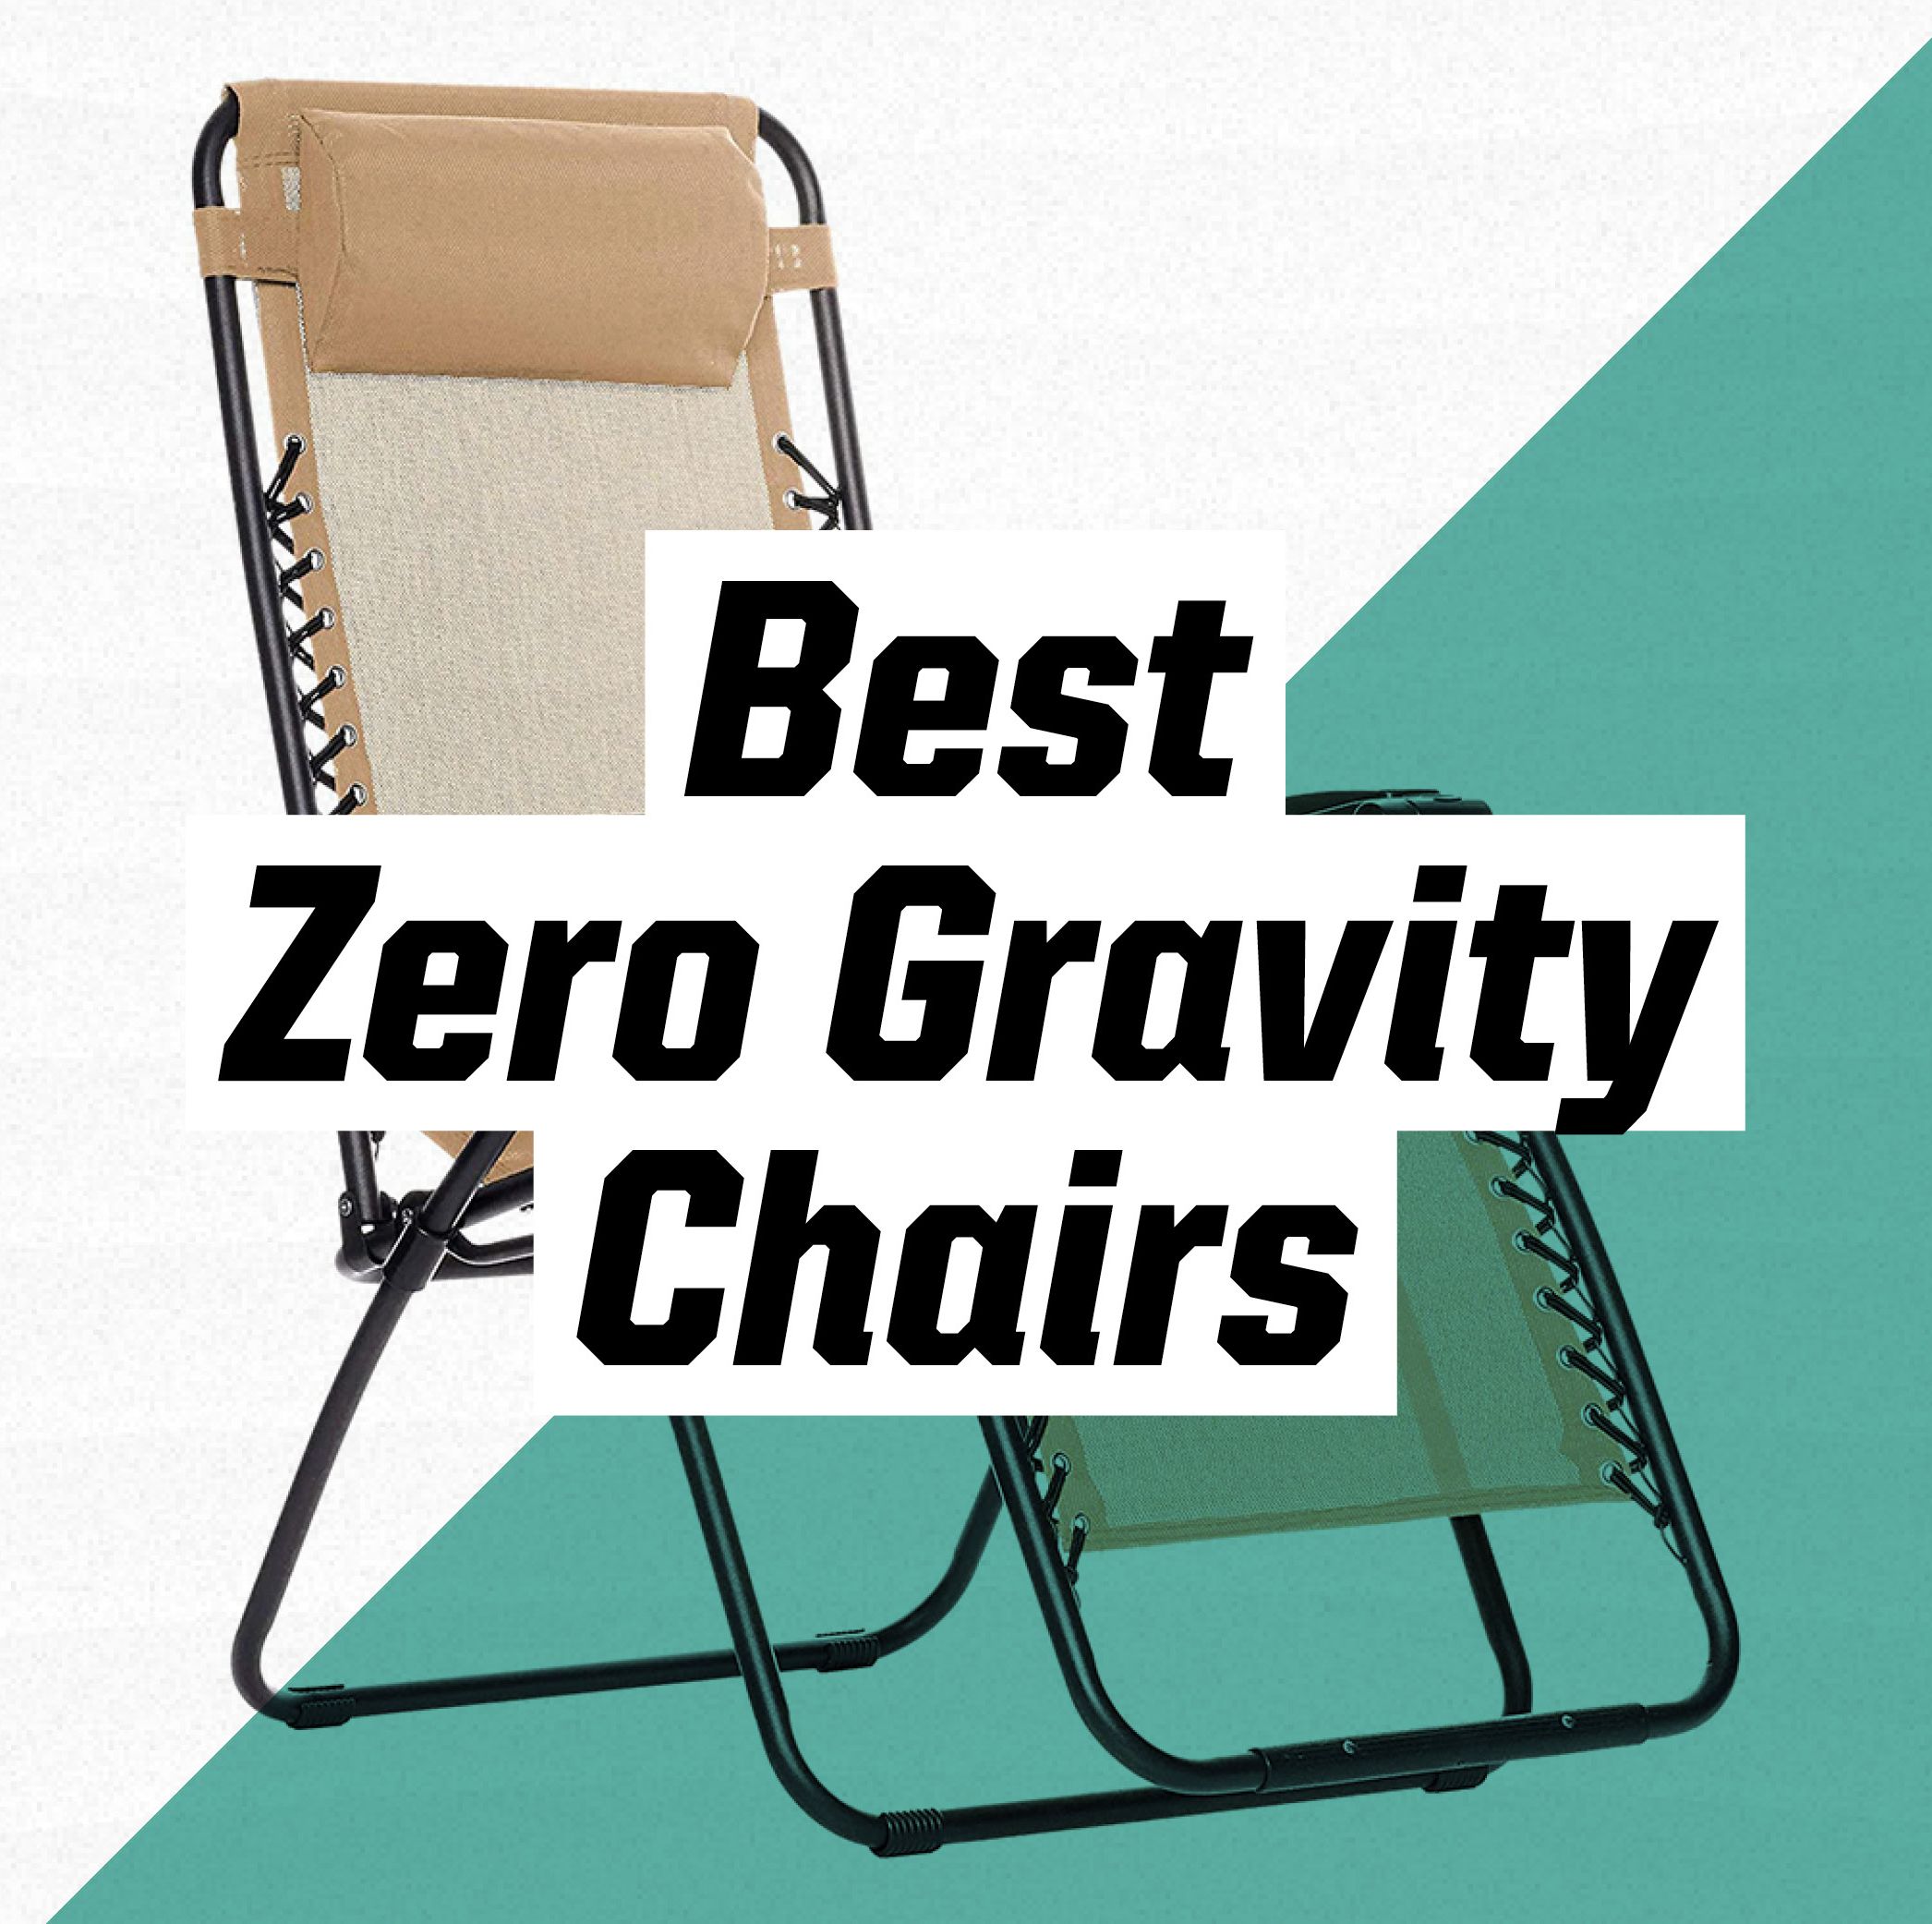 Bliss Out in One of These Top-Rated Zero Gravity Chairs